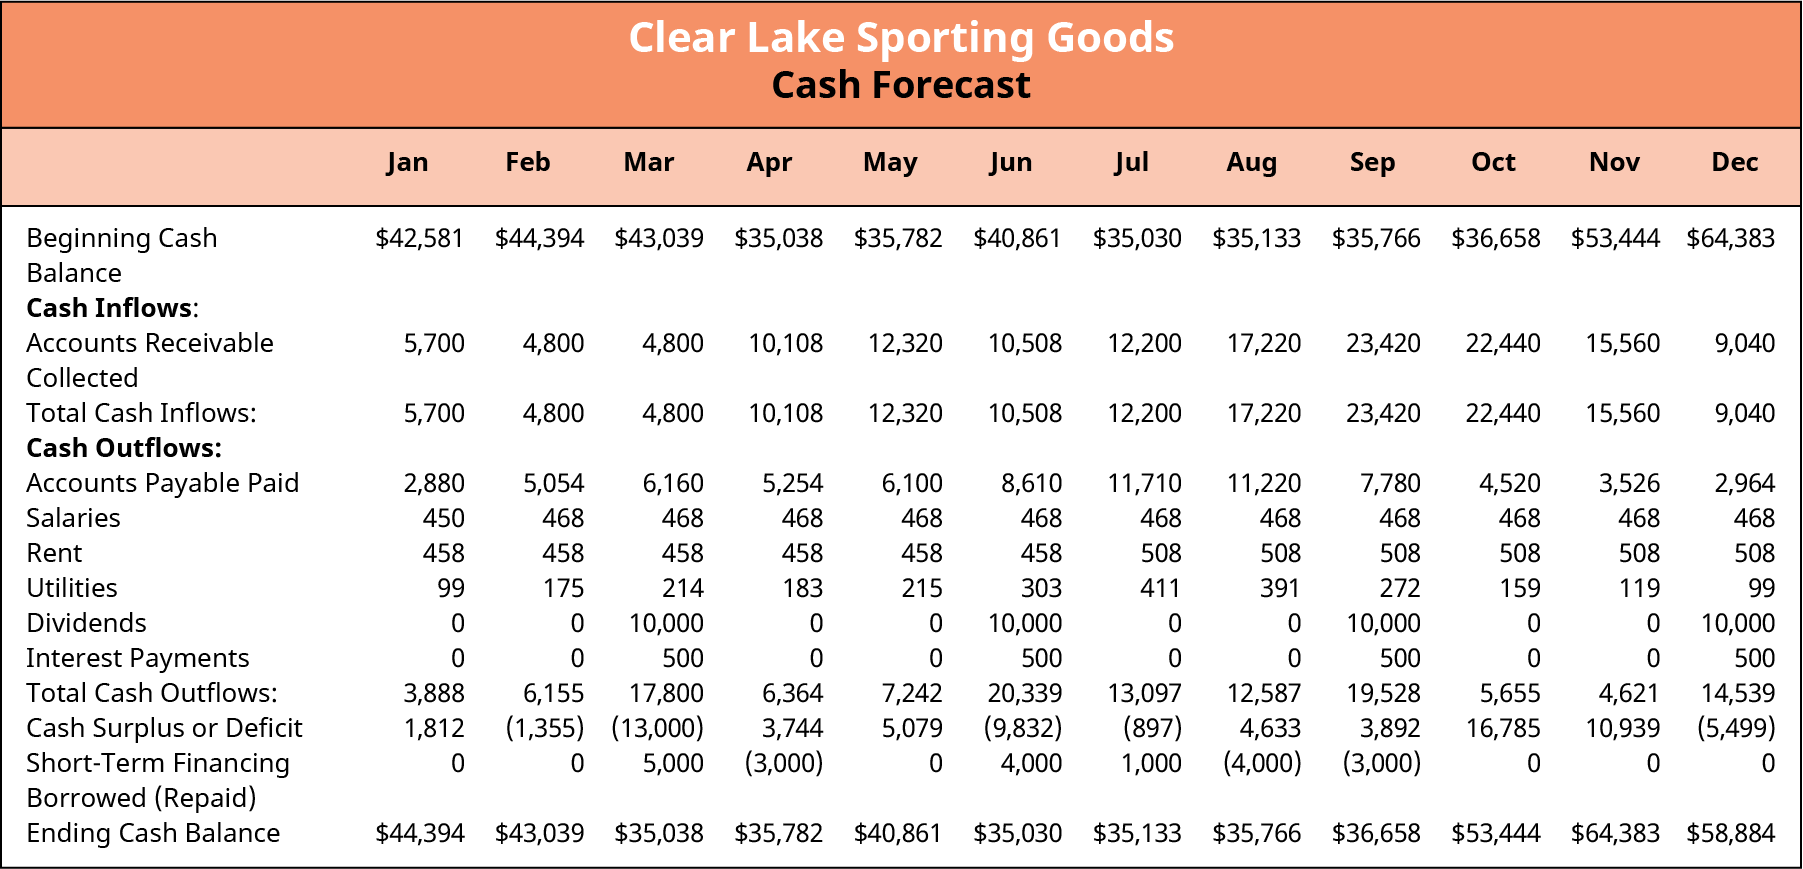 The forecasted cash forecast for Clear Lake Sporting Goods shows if there is surplus or deficit each month. A line item is also added for short term financing to show the months where cash must be borrowed to maintain a minimum cash balance of $35,000 and the months where a surplus allows prior month's financing to be repaid.